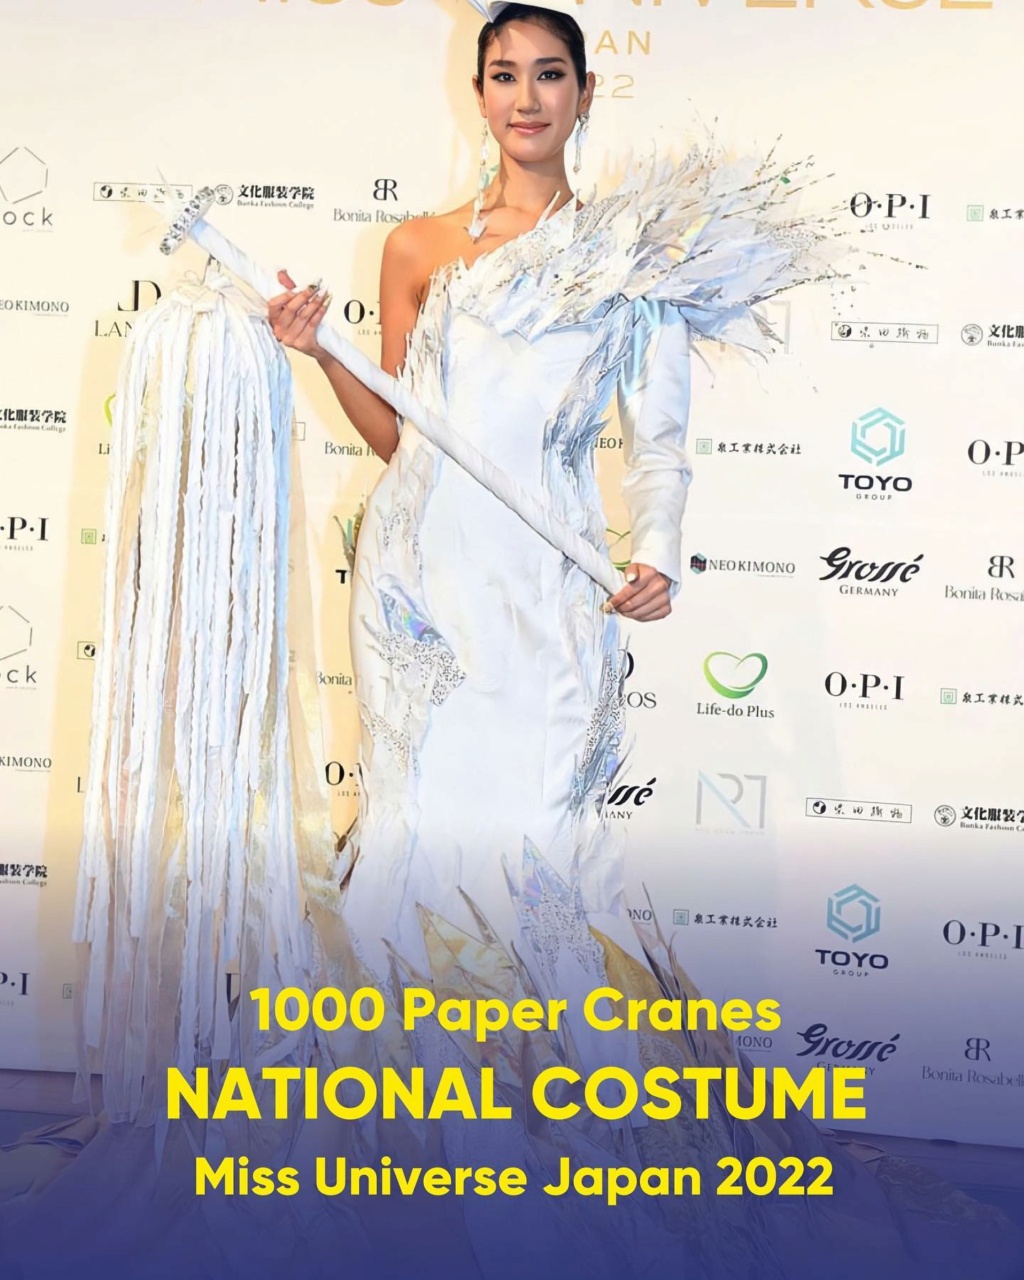  ♔ MISS UNIVERSE 2022 - NATIONAL COSTUME  ♔ 31993510